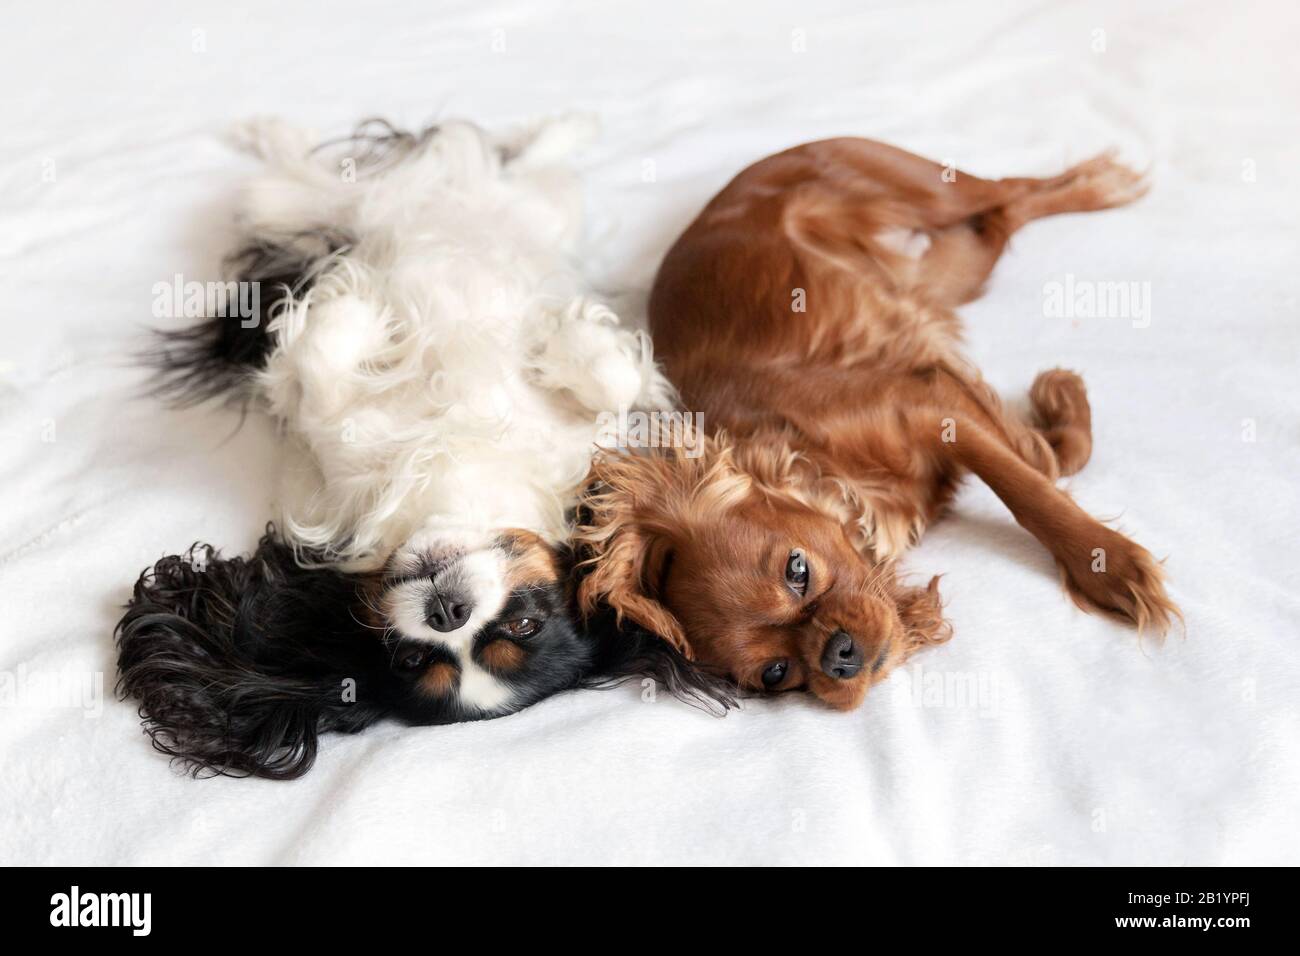 Two happy dogs in funny sleeping position Stock Photo